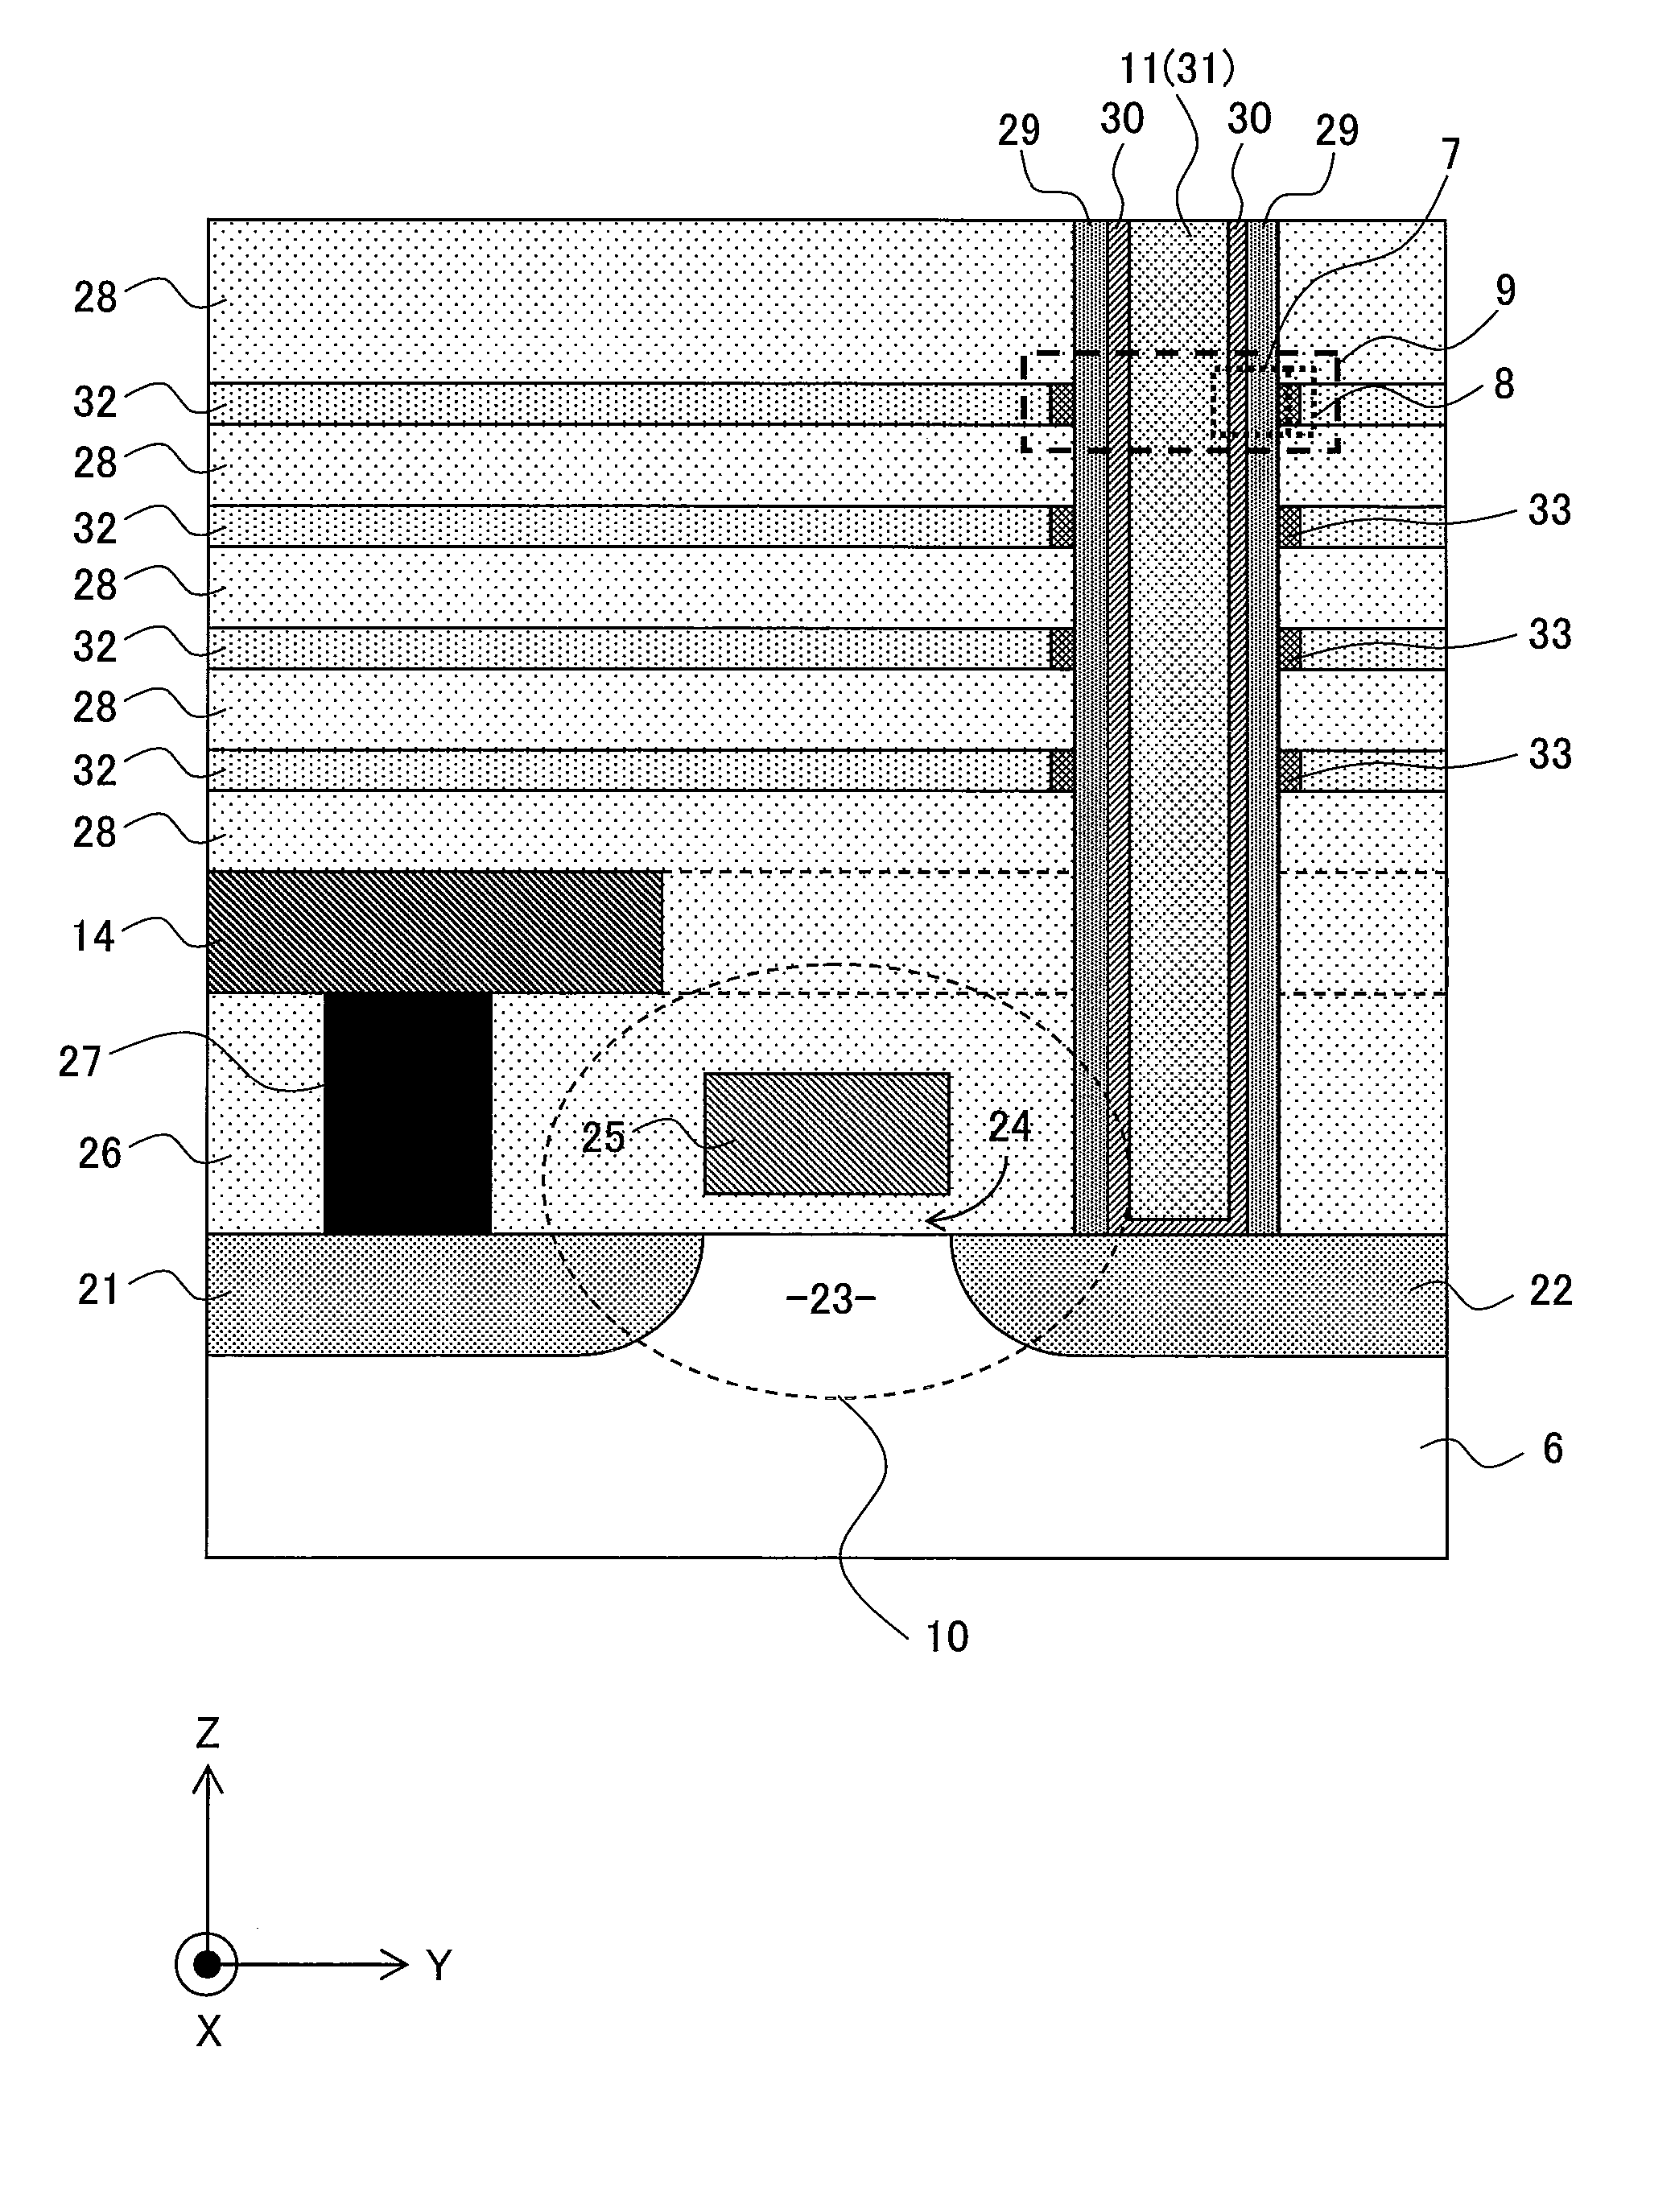 Nonvolatile semiconductor memory device and manufacturing method for same